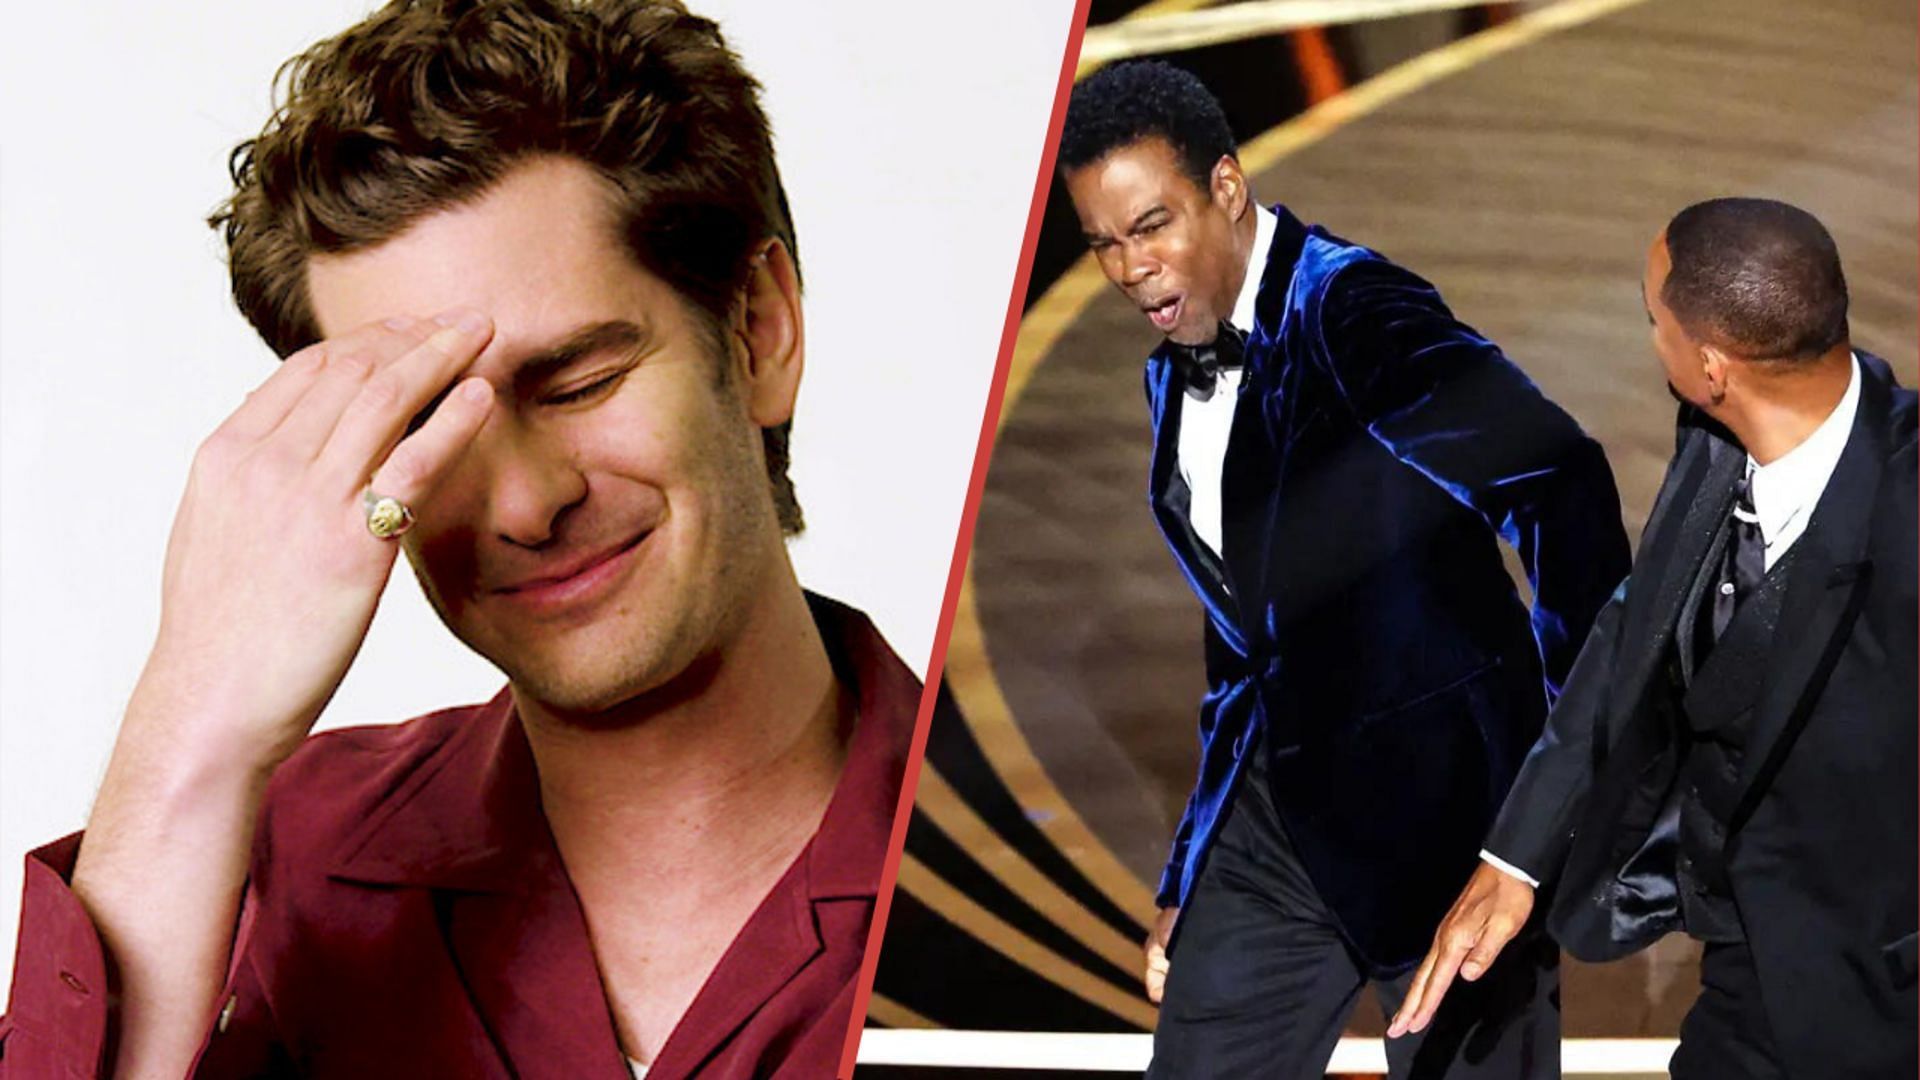 Andrew Garfield&#039;s hilarious recreation of Will Smith slapping Chris Rock at the Oscars 2022 (Image via Netflix, and Los Angeles Times/Getty Images)